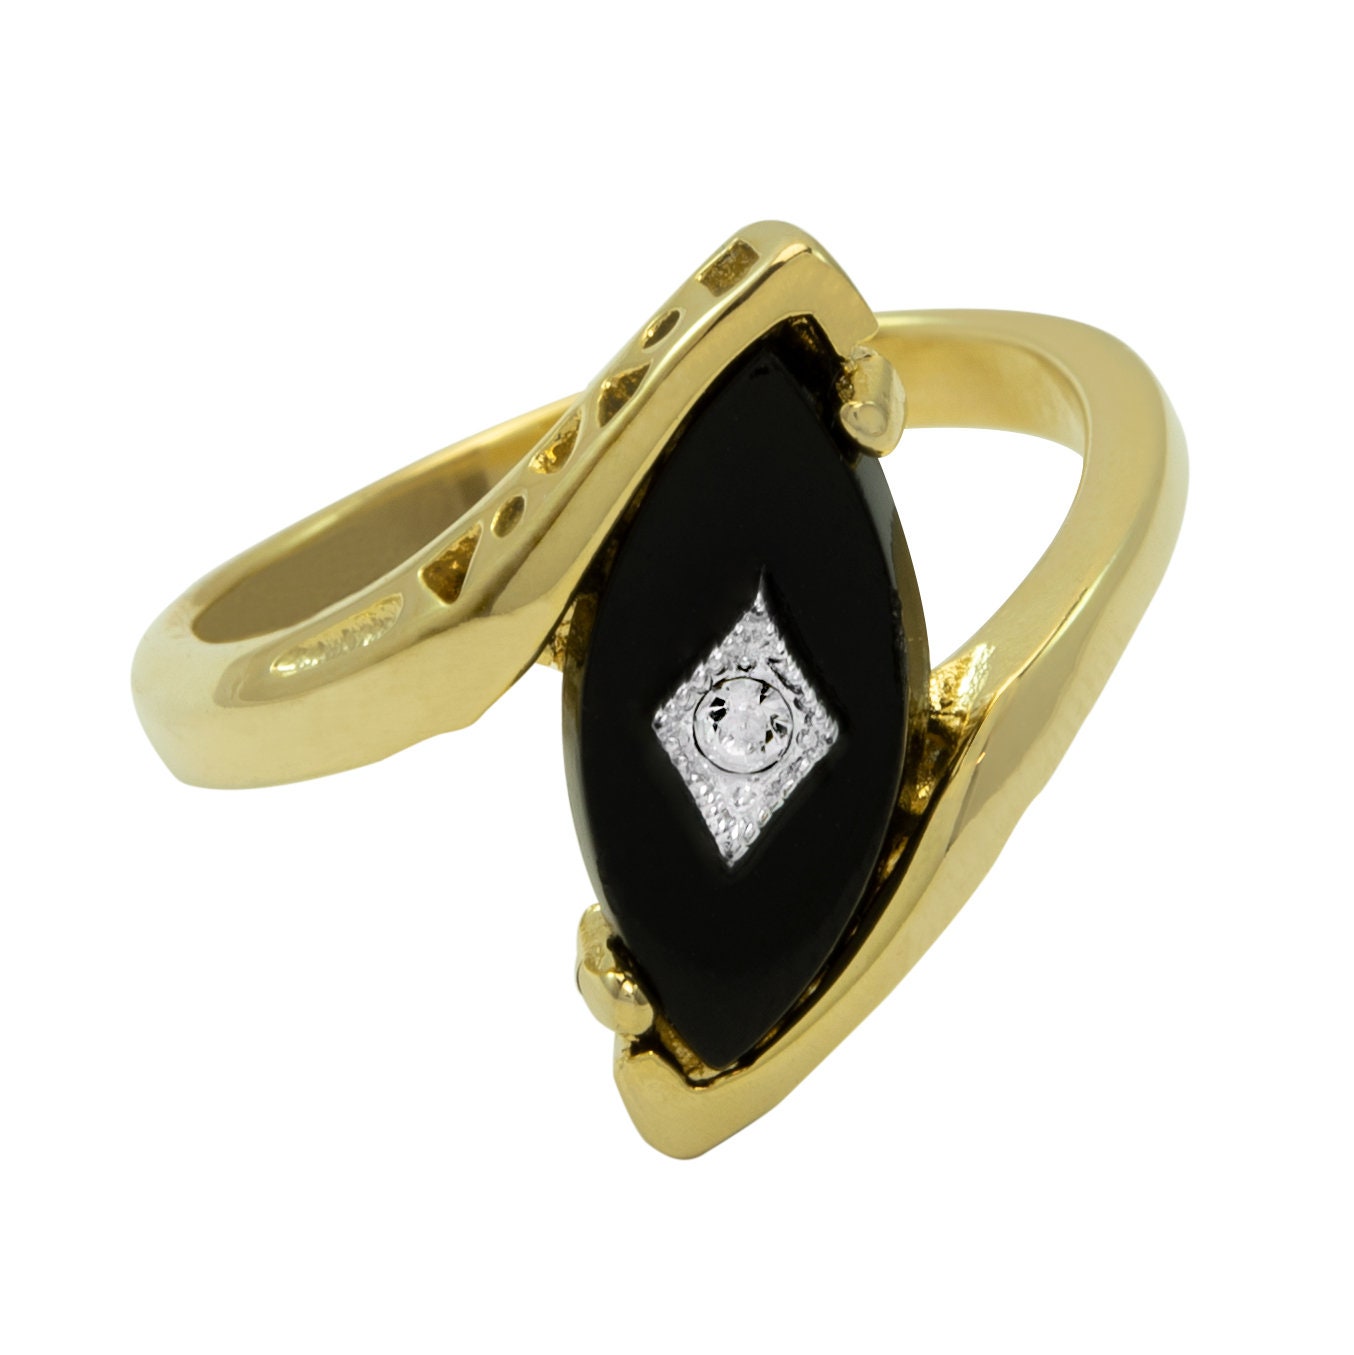 Vintage Imitation Onyx Stone set with Austrian Crystal 18kt Yellow Gold Electroplated Setting Made in USA #R961 Size: 4